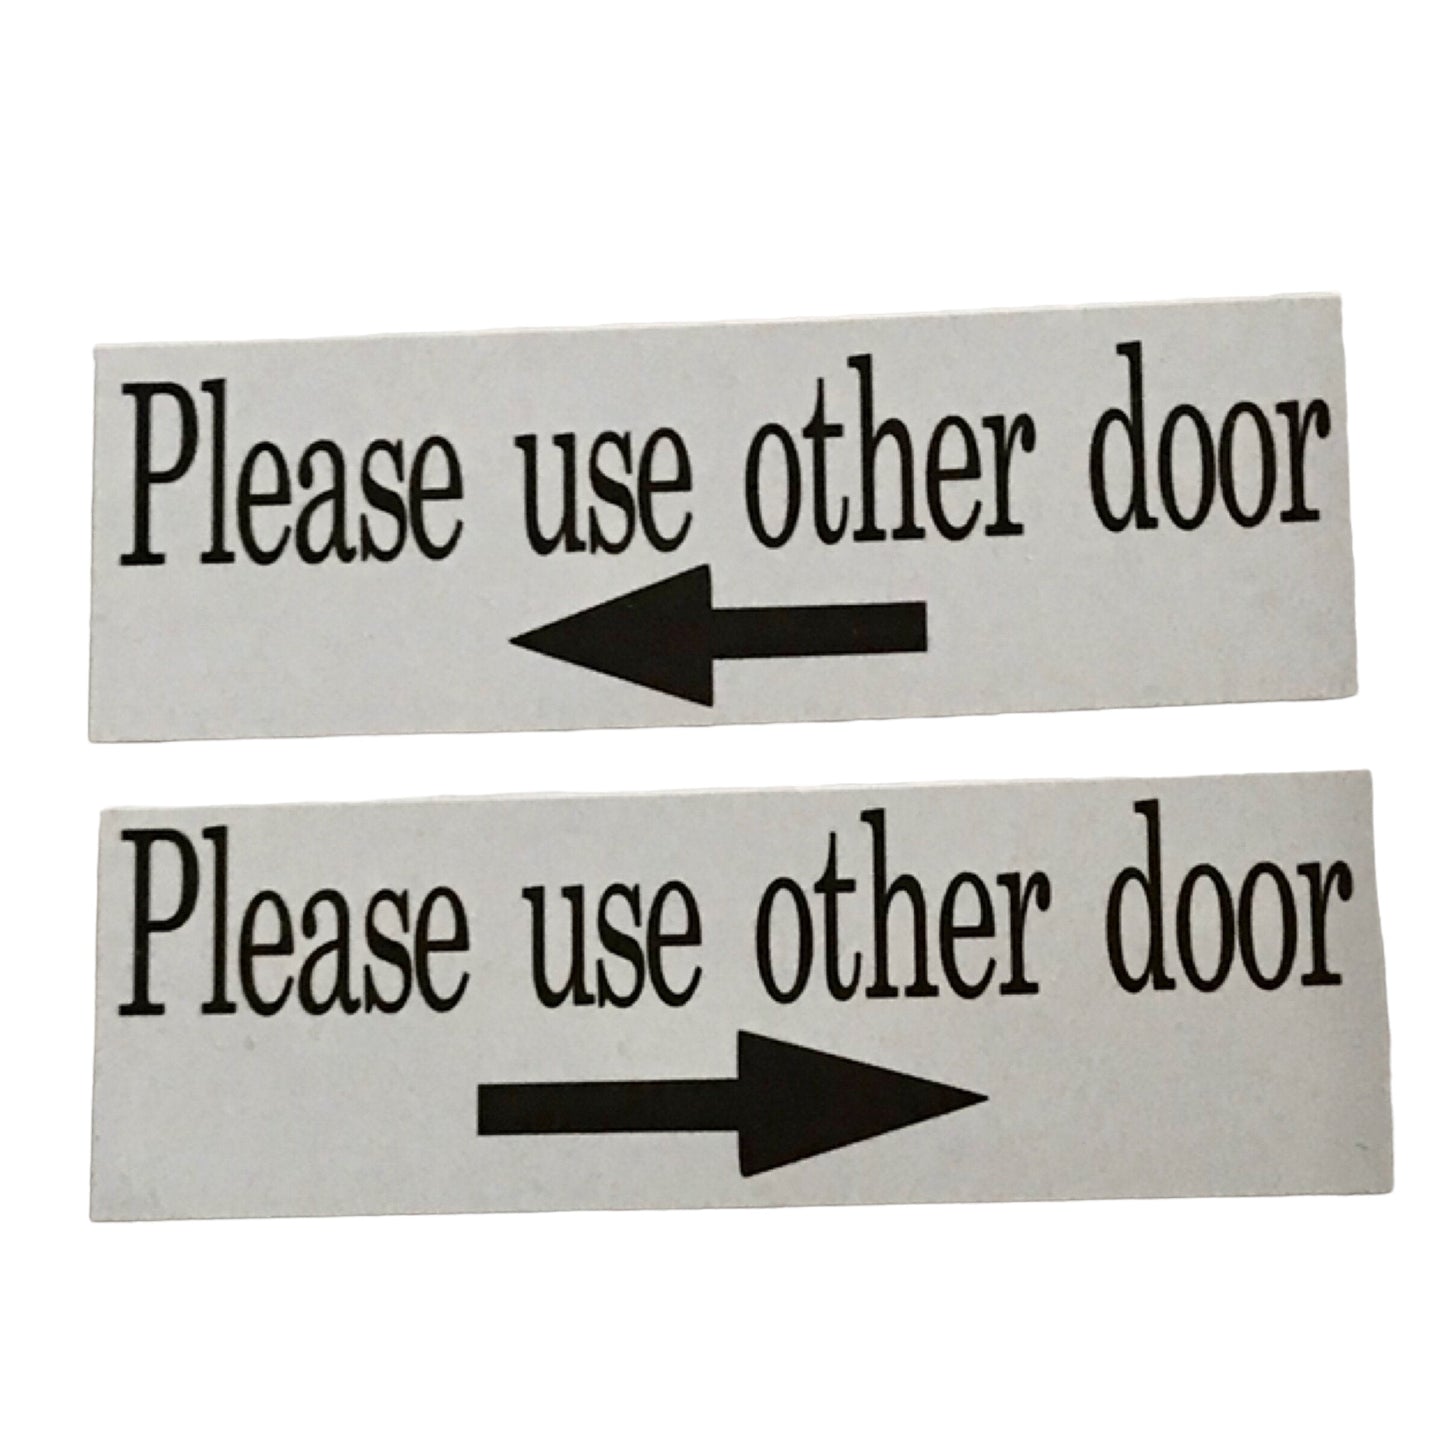 Please Use Other Door with Arrow Sign - The Renmy Store Homewares & Gifts 